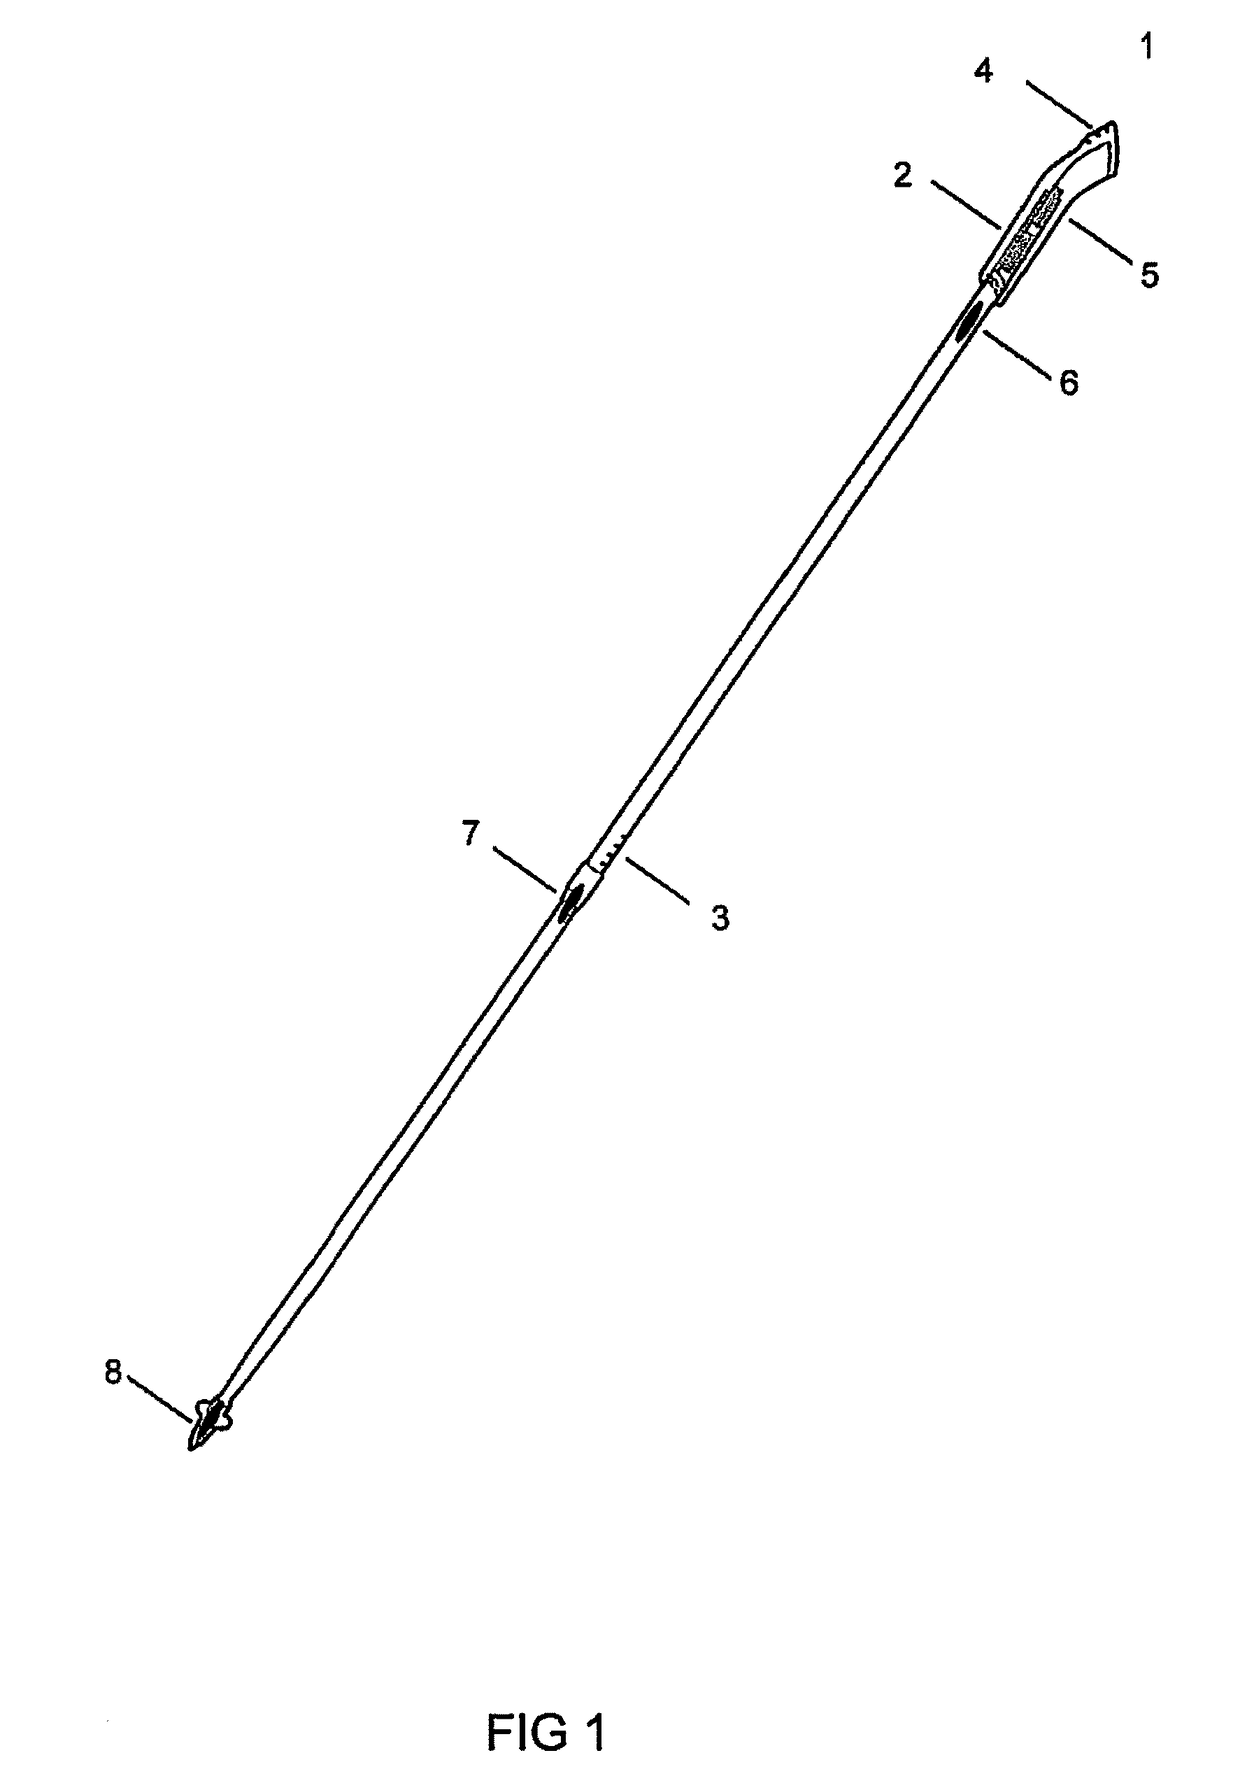 Sport pole with sensors and a method for using it